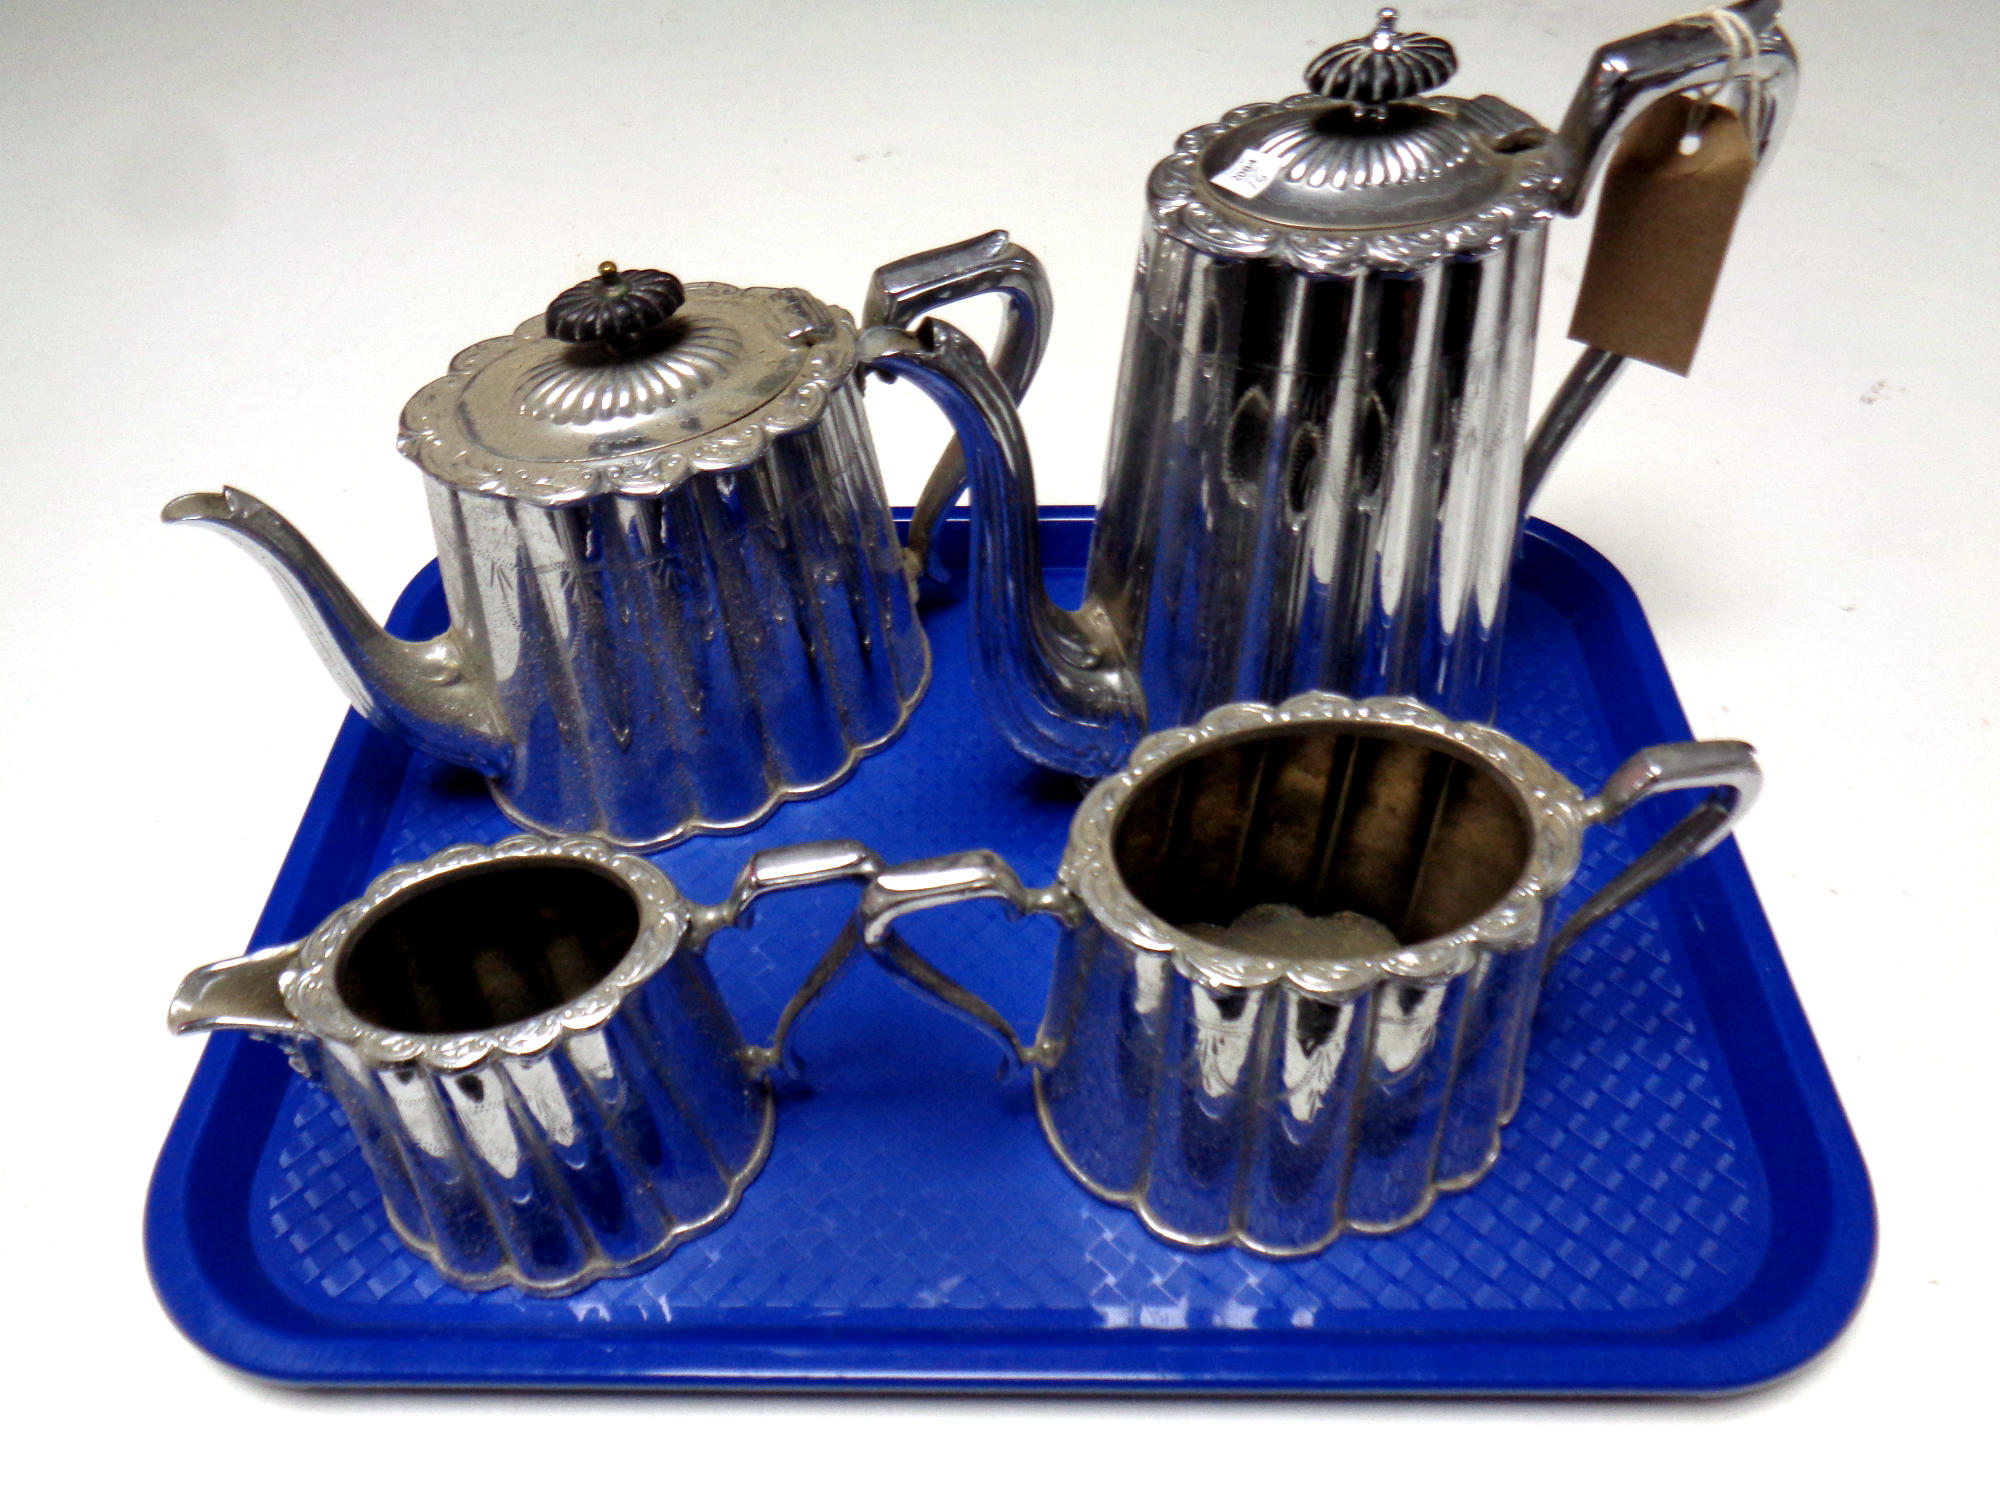 A tray containing a four piece plated tea and coffee service